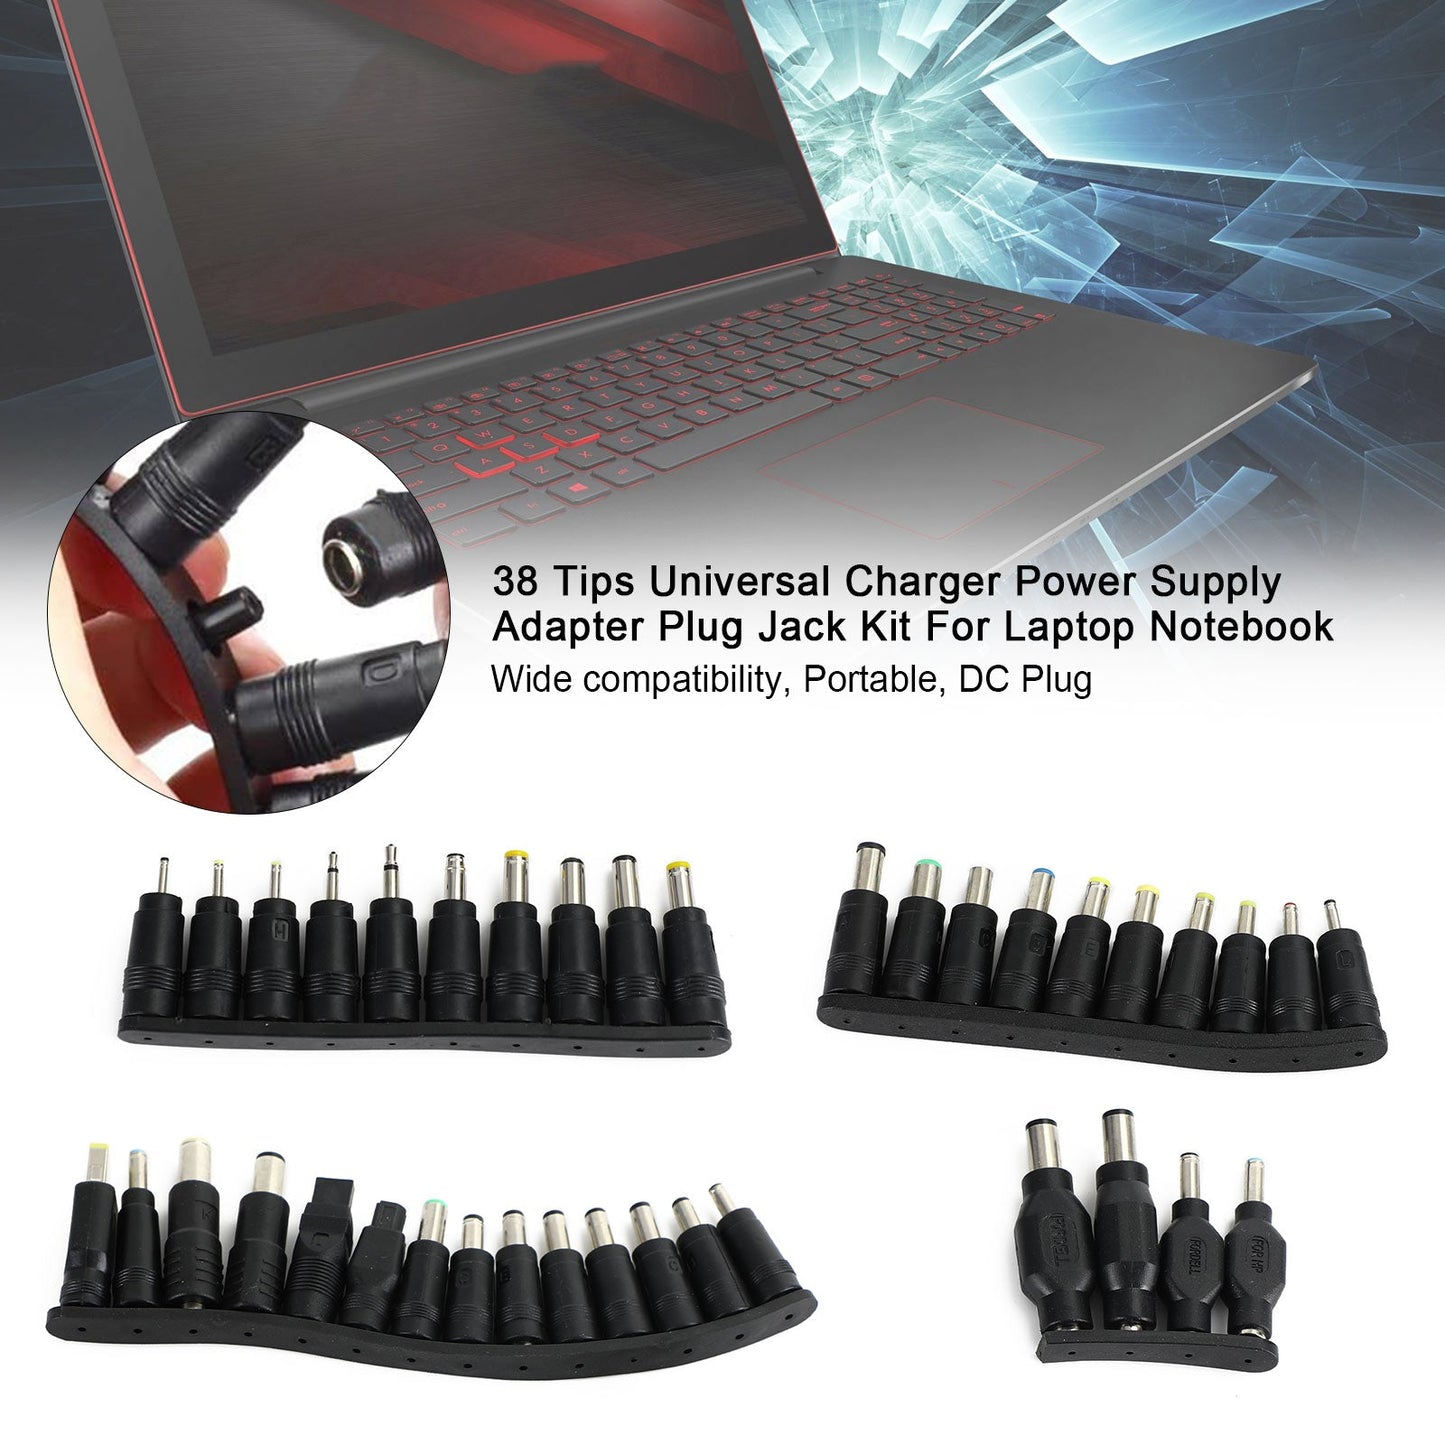 Universal 38 Tips Charger Power Supply Adapter Plug Jack Set for Laptop Notebook